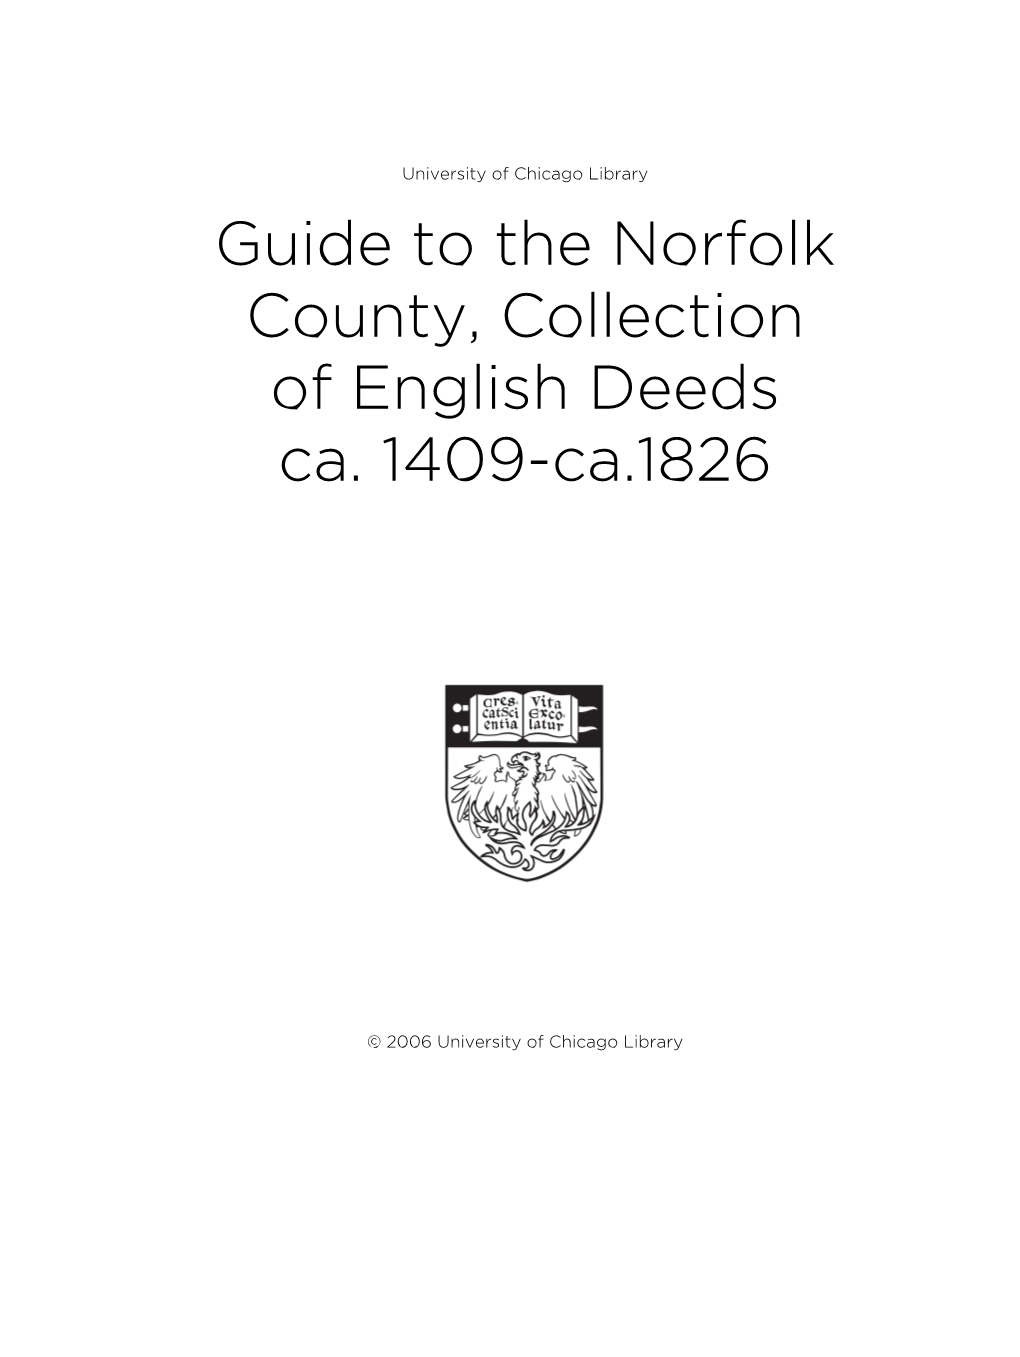 Guide to the Norfolk County, Collection of English Deeds Ca. 1409-Ca.1826